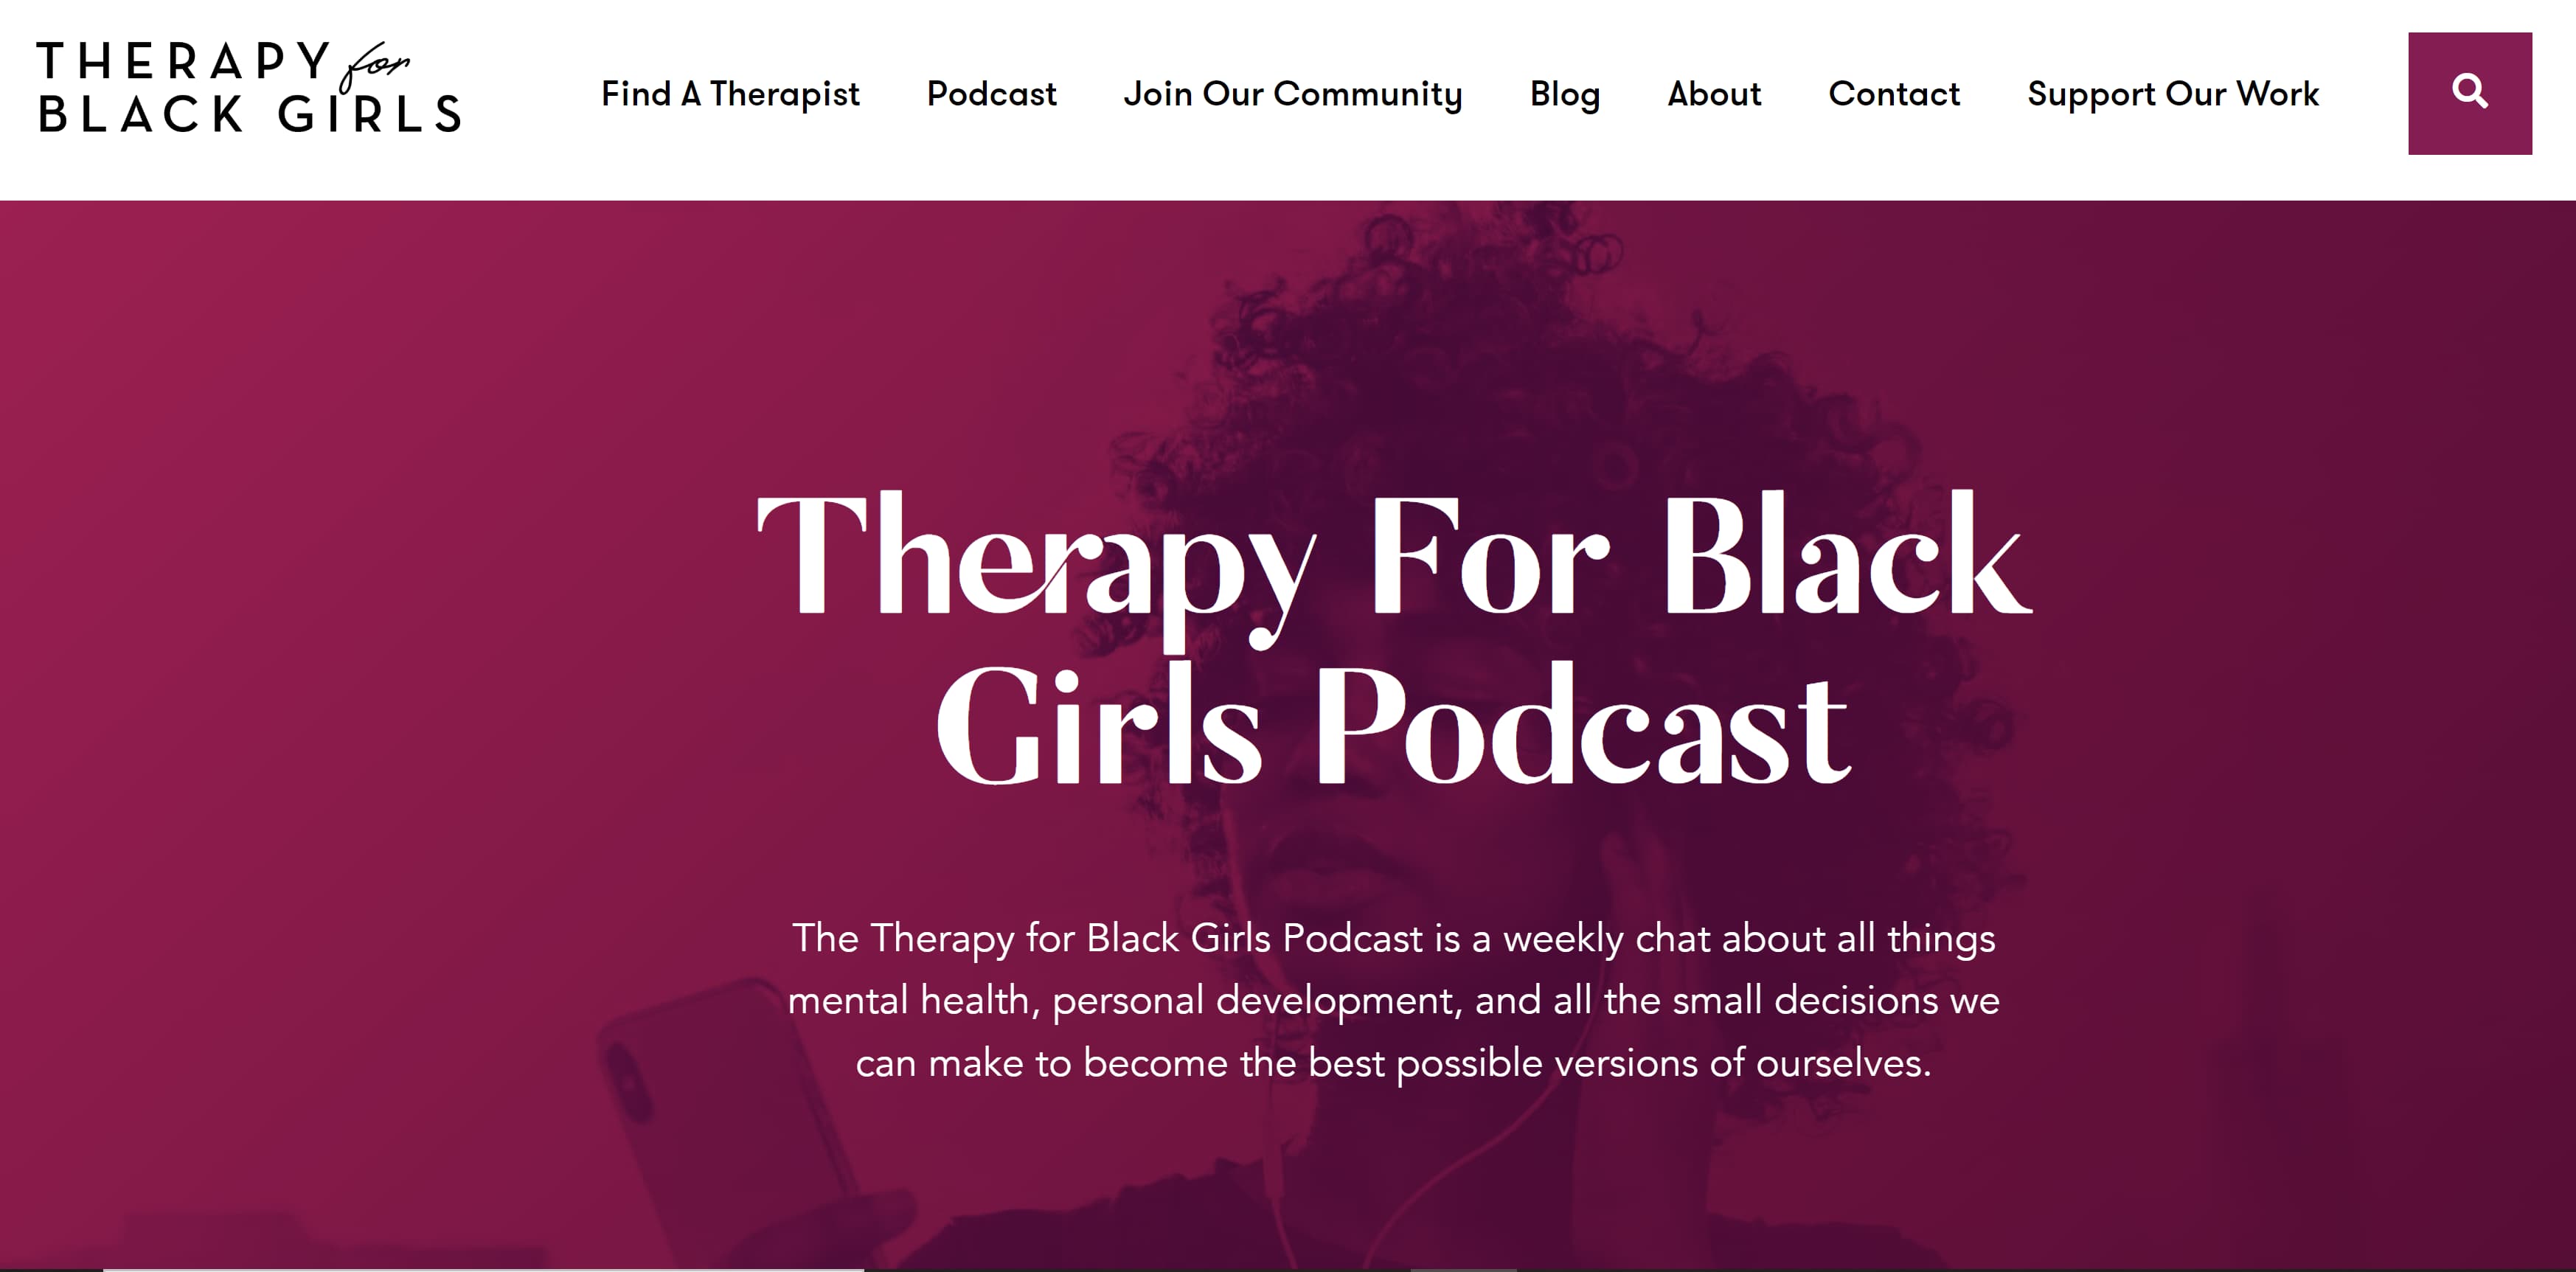 Therapy for Black Girls is an example of a niche digital creator